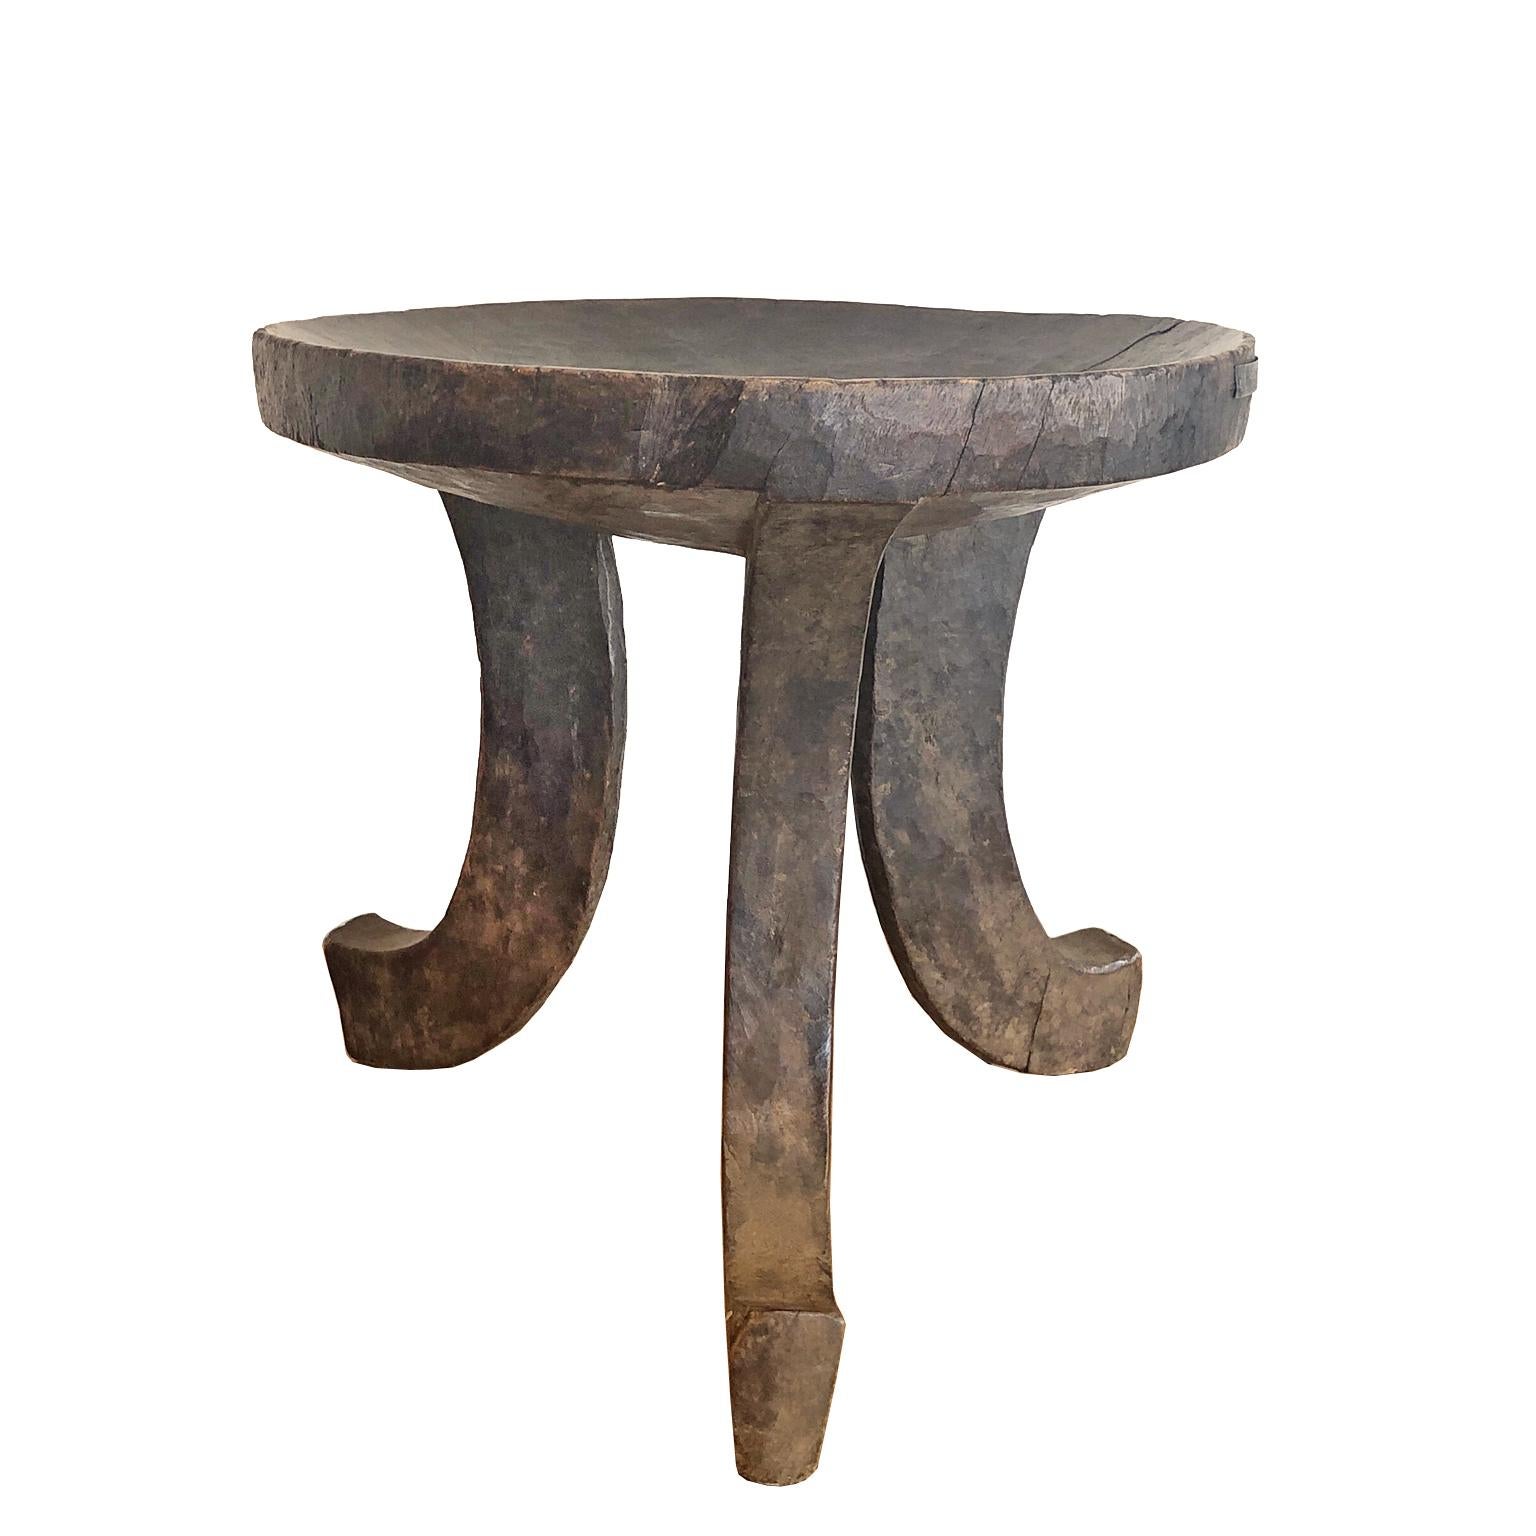 A three-legged African stool or seat carved from a single piece of wood, attributable to the Oromo people in or around the city of Jimma in Ethiopia. This stool was as a utilitarian object that was used in everyday tribal life and not a decorative